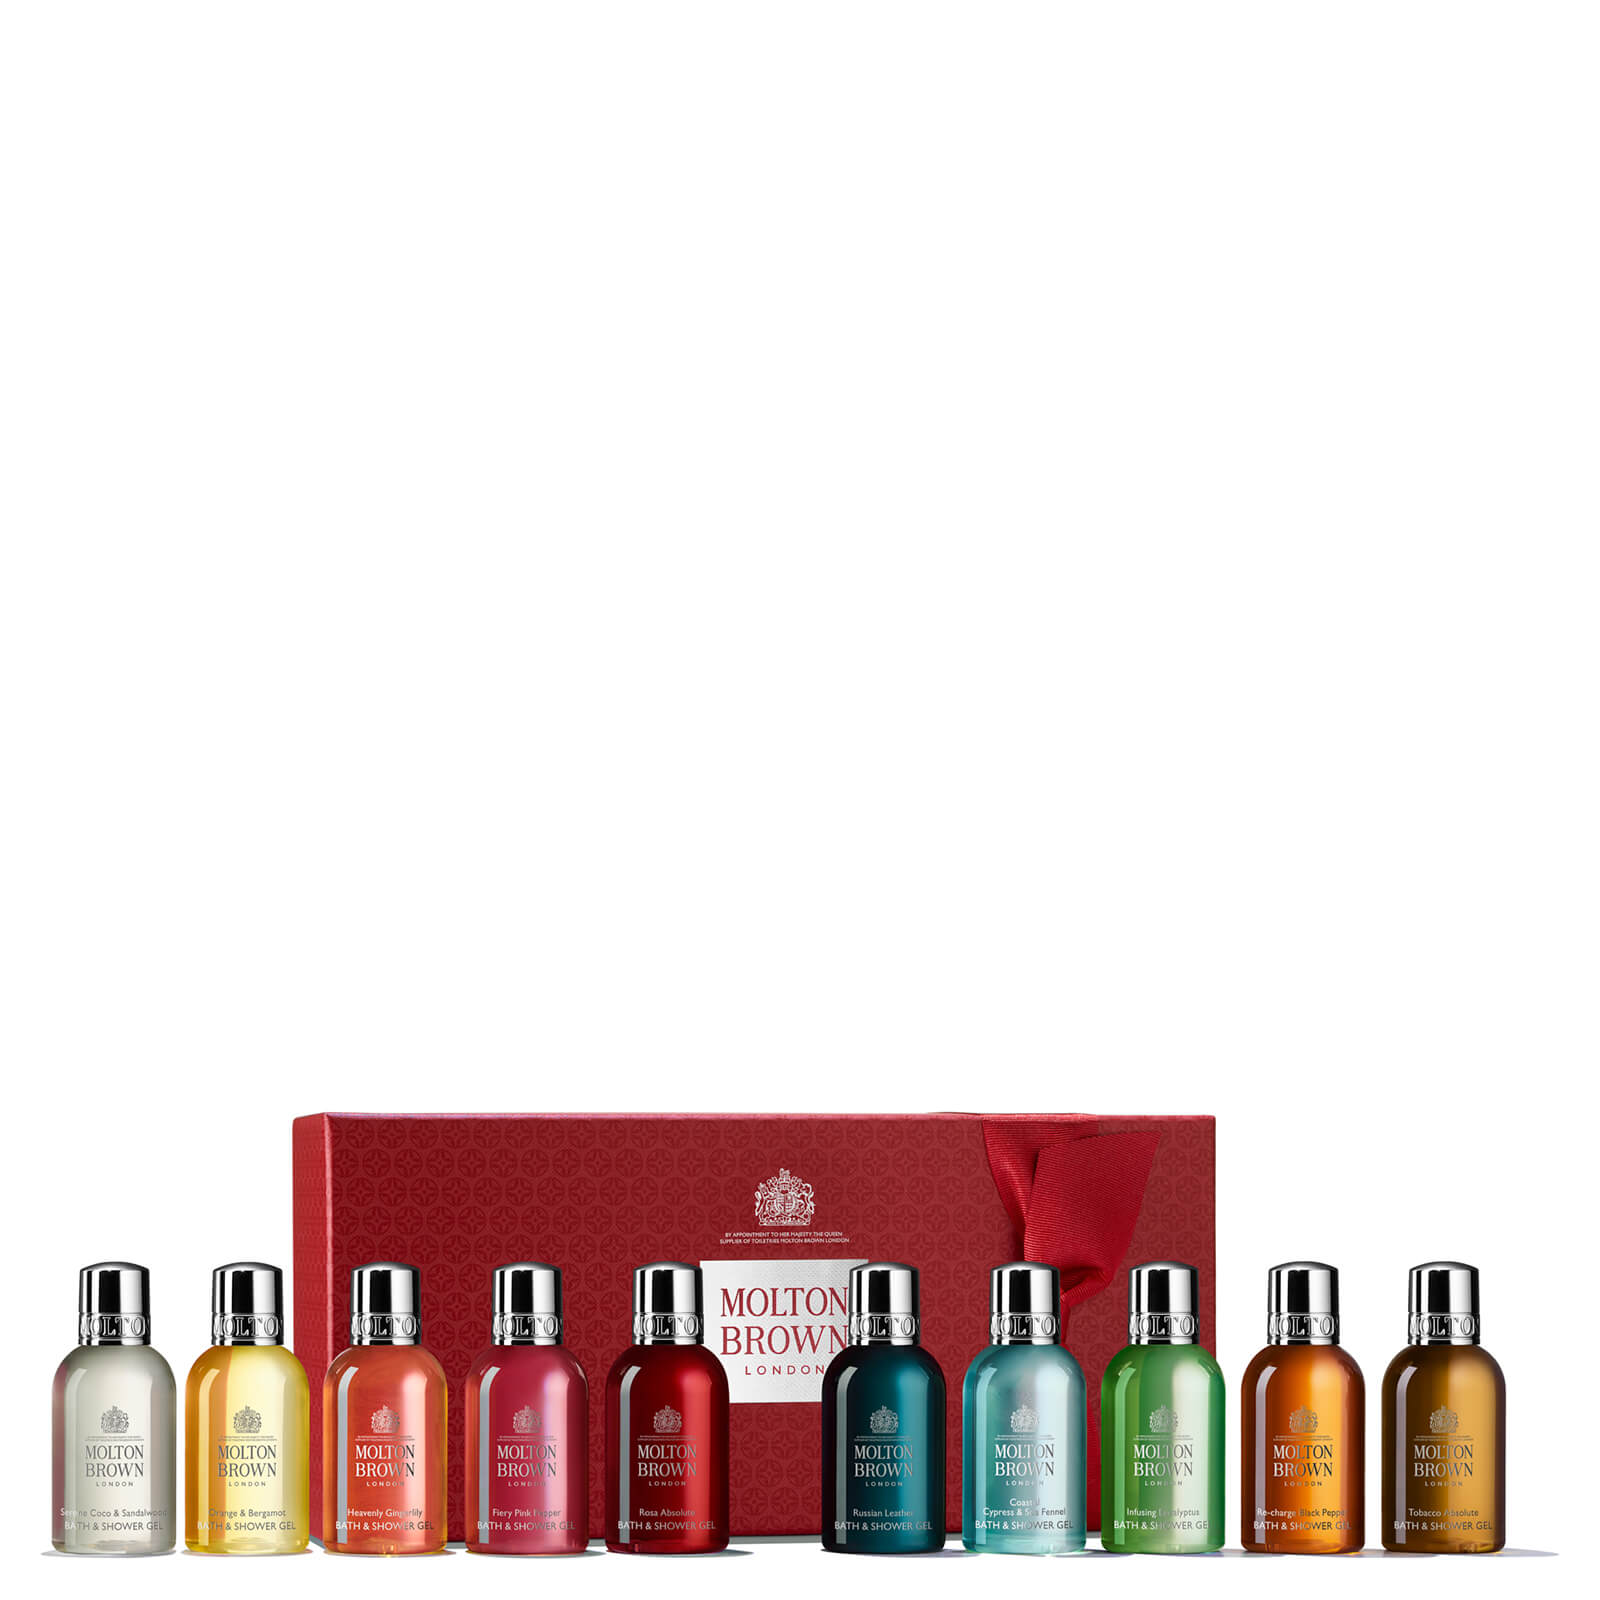 Molton Brown Stocking Fillers Christmas Gift Collection